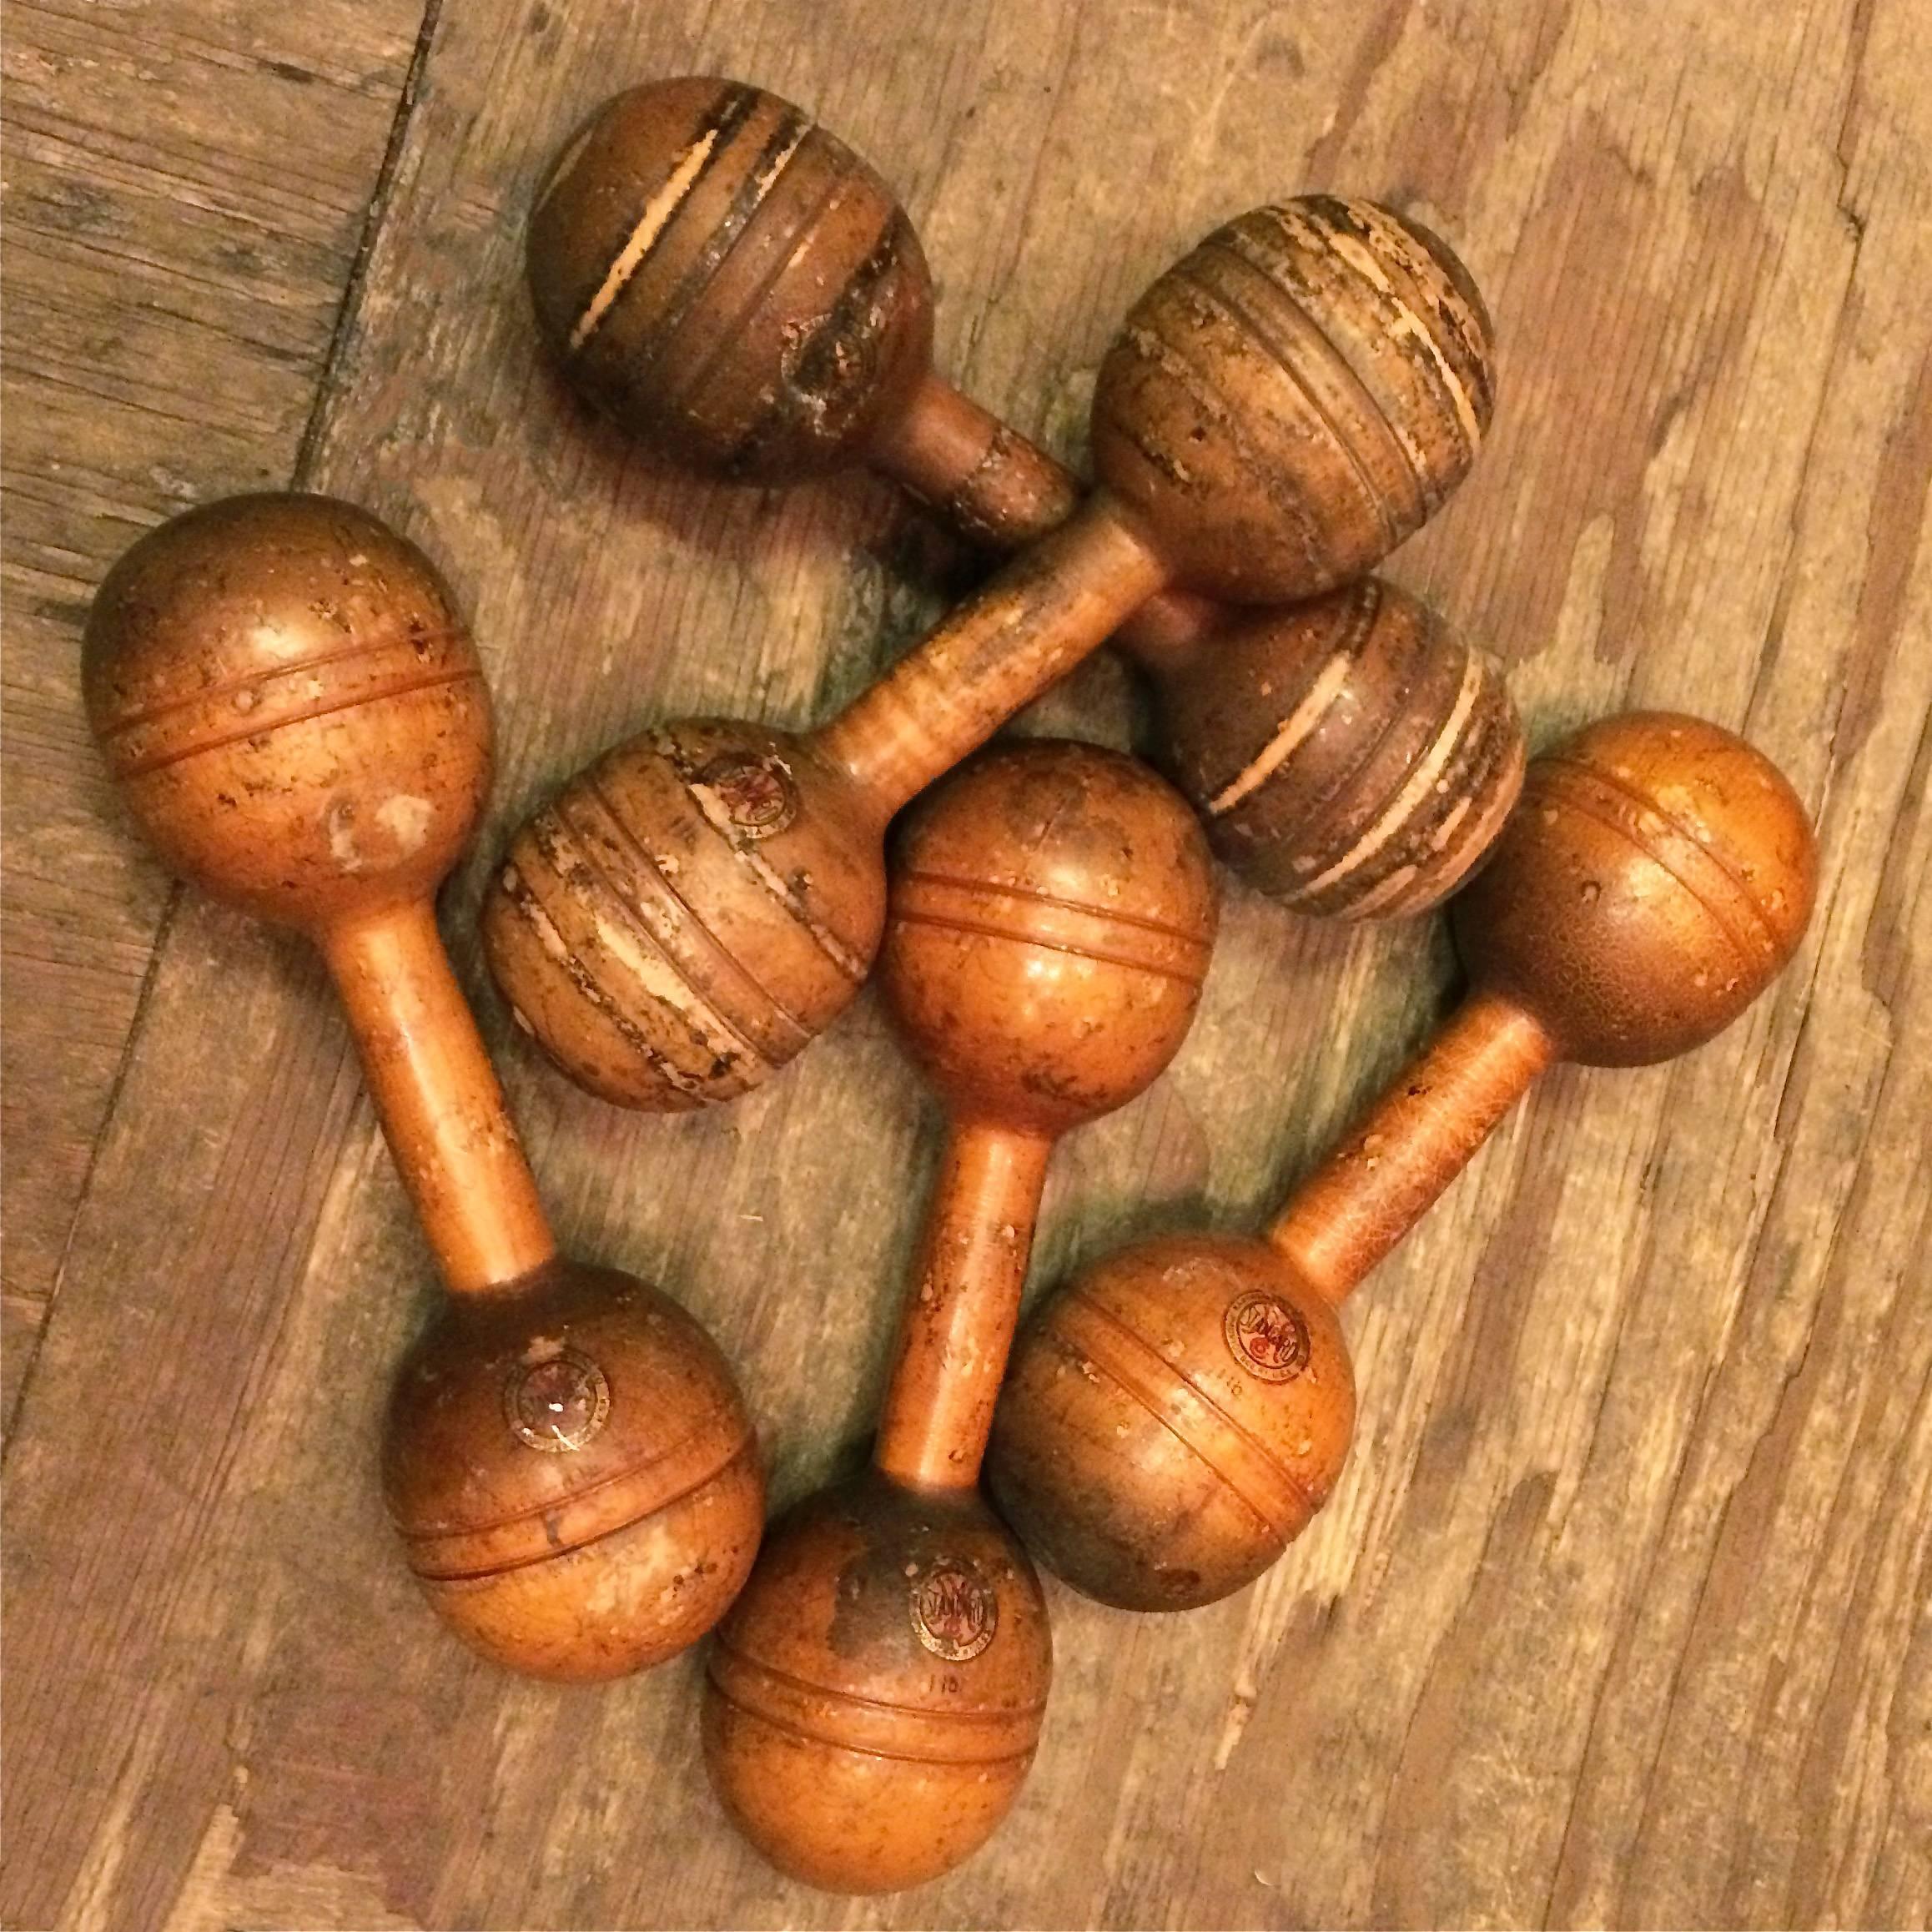 1lb, maple, dumbbell, hand weights by Standard can be cleaned up to a degree but look great sporting their original well-worn patina. Seven pairs available.